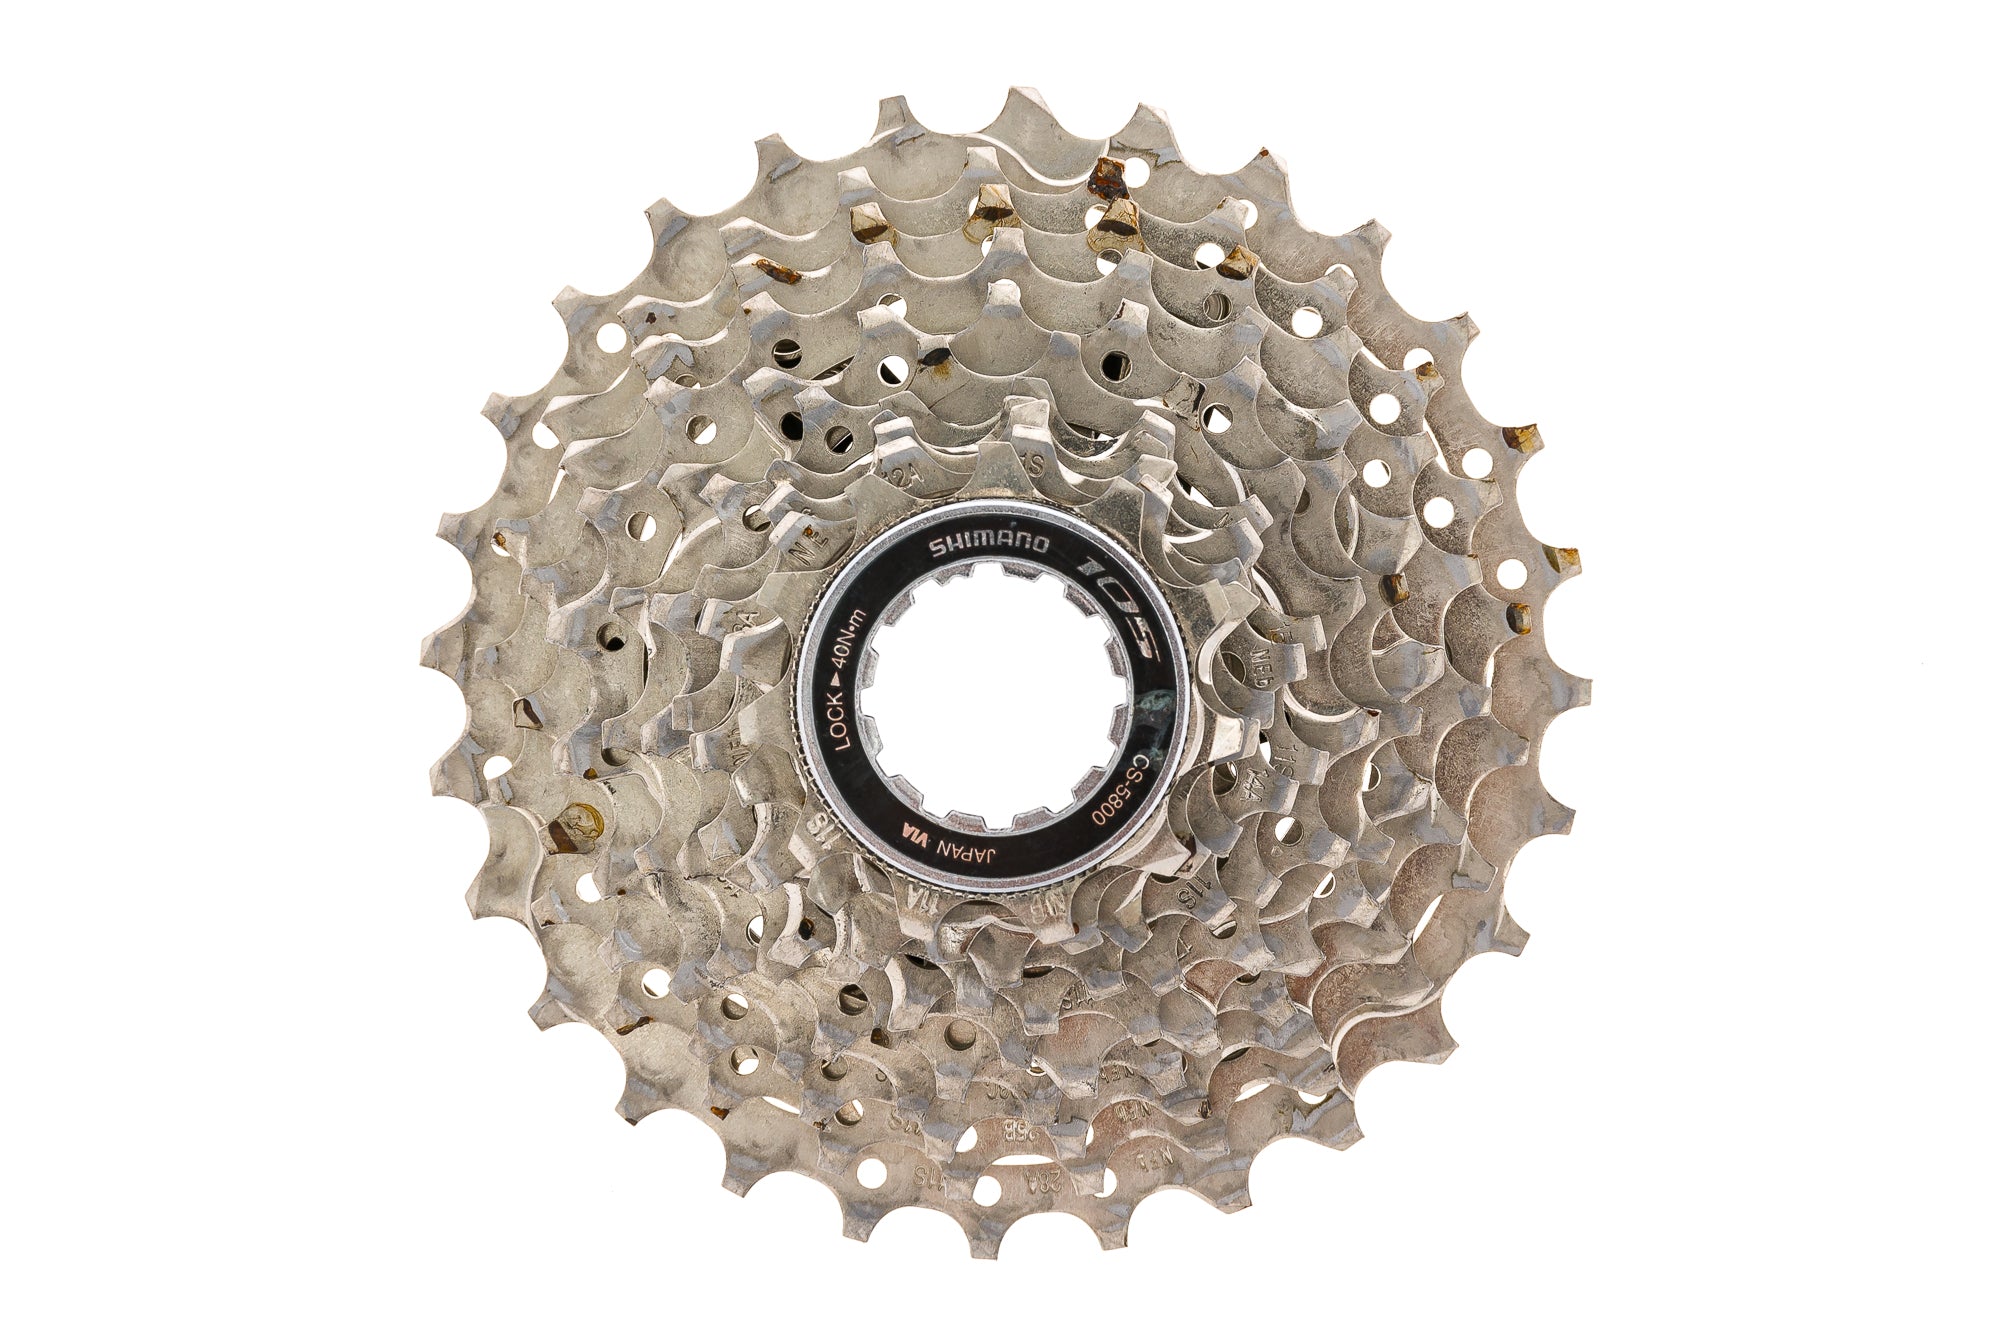 Shimano 105 CS-5800 Cassette 11 Speed 11-28T - Pre-Owned drive side